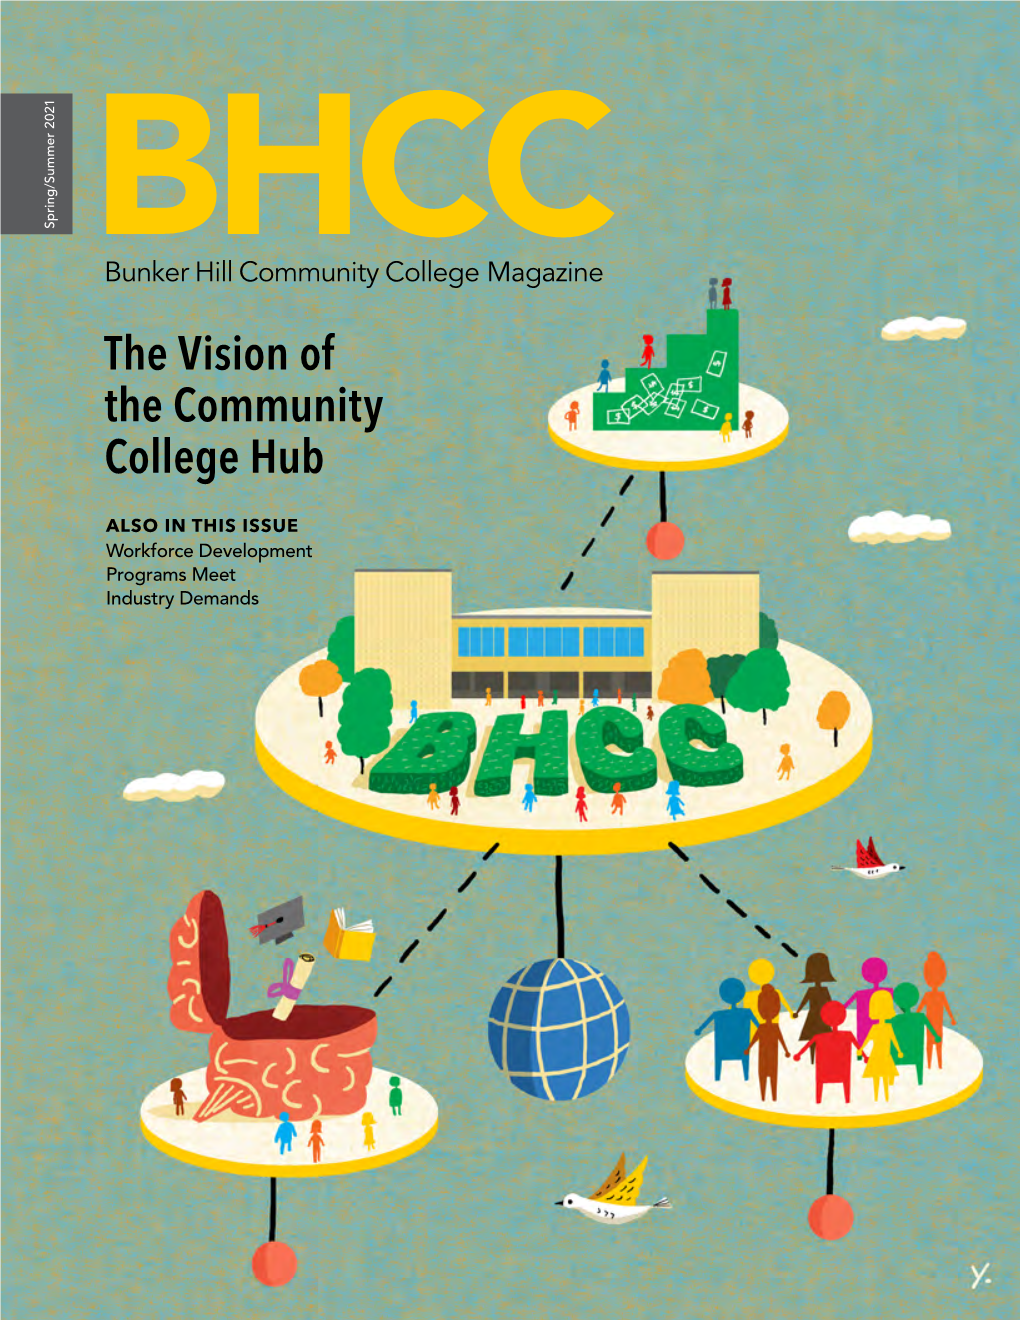 The Vision of the Community College Hub